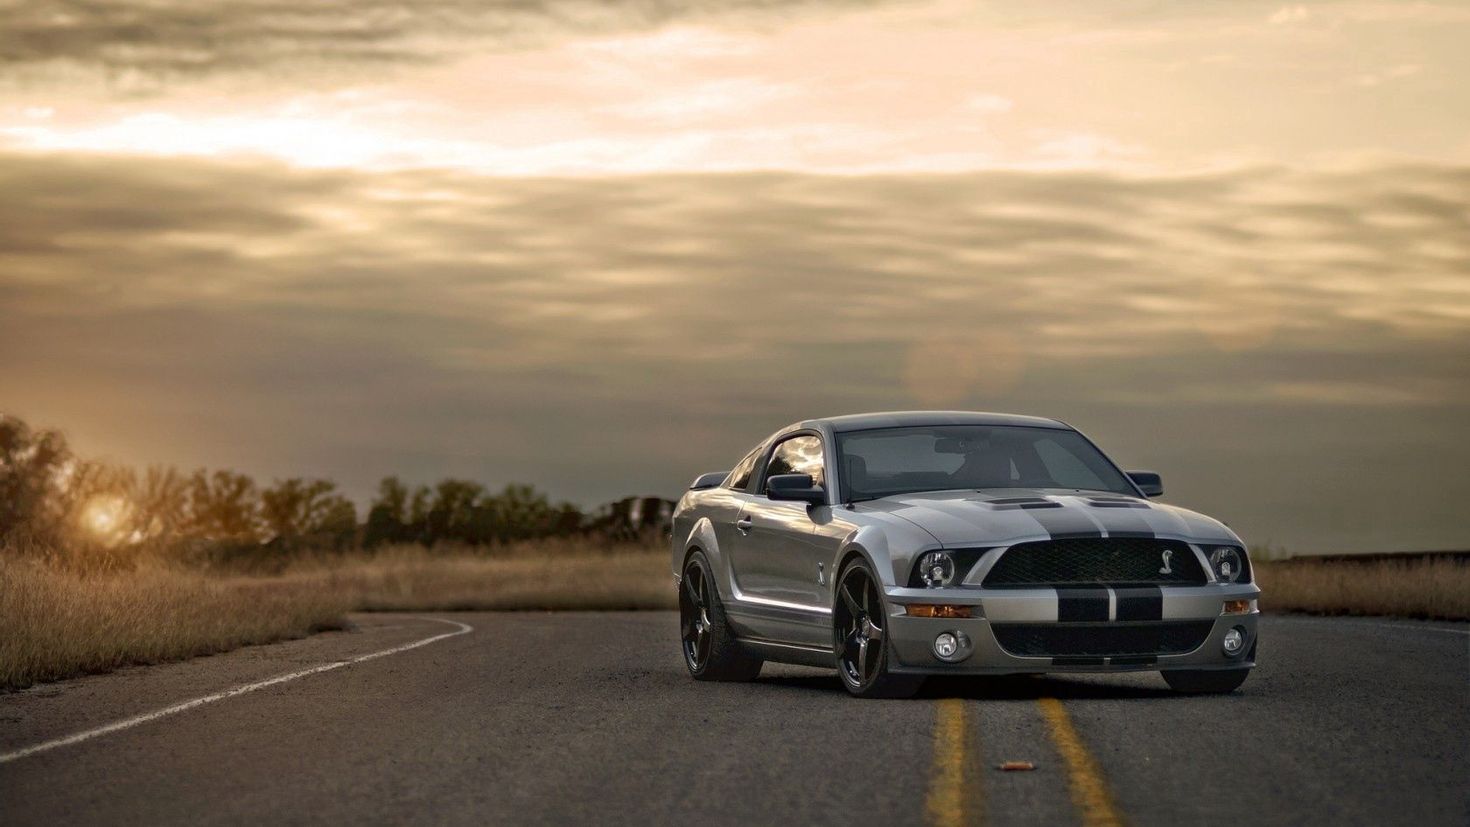 Мустанг дорога. Форд Мустанг Шелби. Ford Mustang Shelby gt Silver. Ford Mustang Shelby 2022.